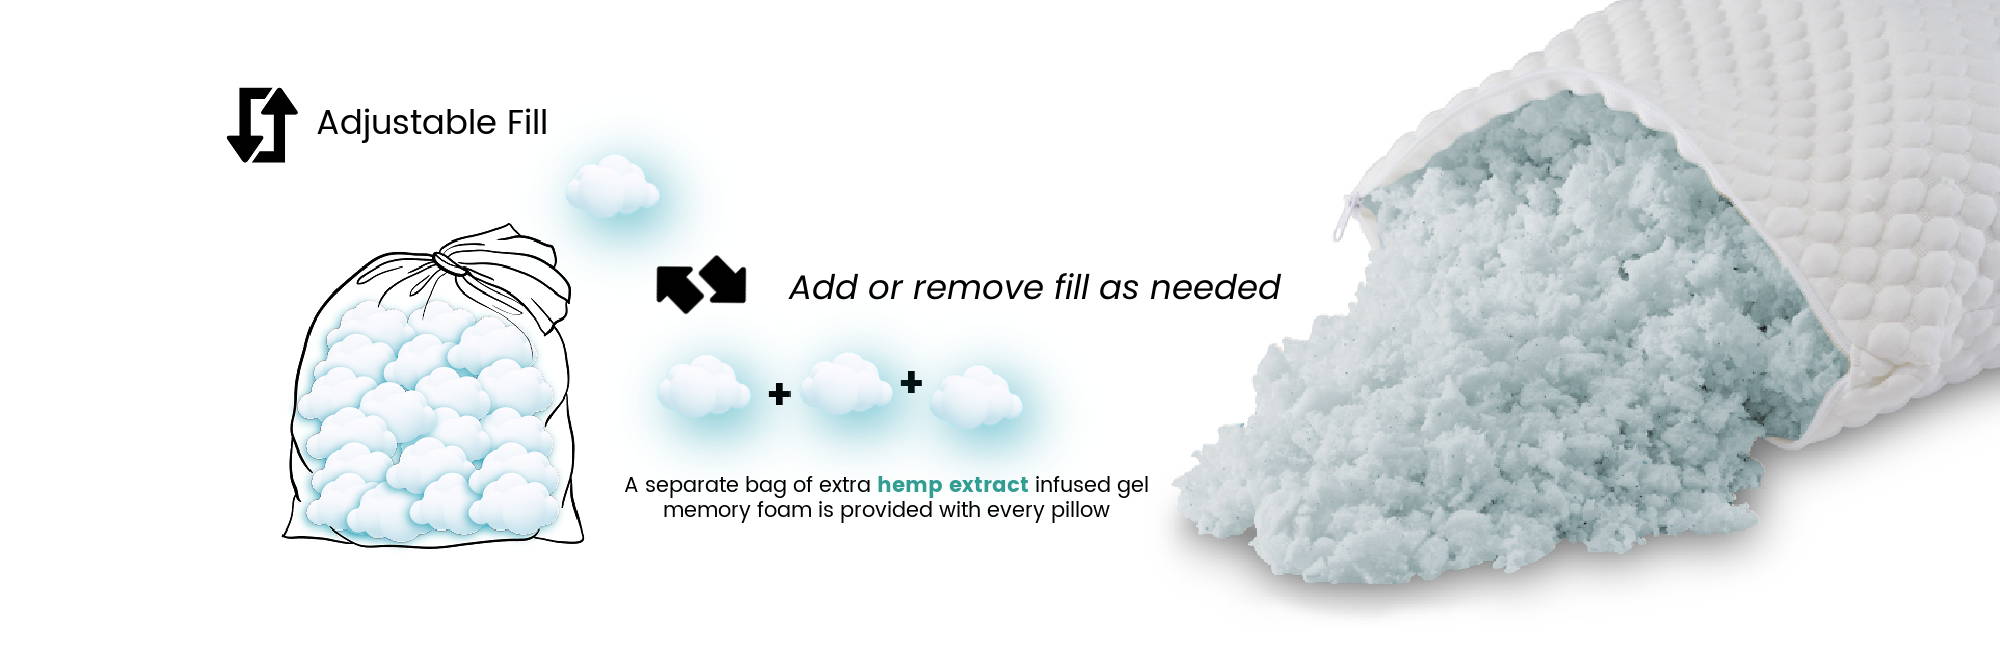 An open pillow with the adjustable fill CBD gel memory foam spilling out and an extra bag of foam so you can add or remove fill as needed for the best comfort. A separate bag of fill comes with your pillow.